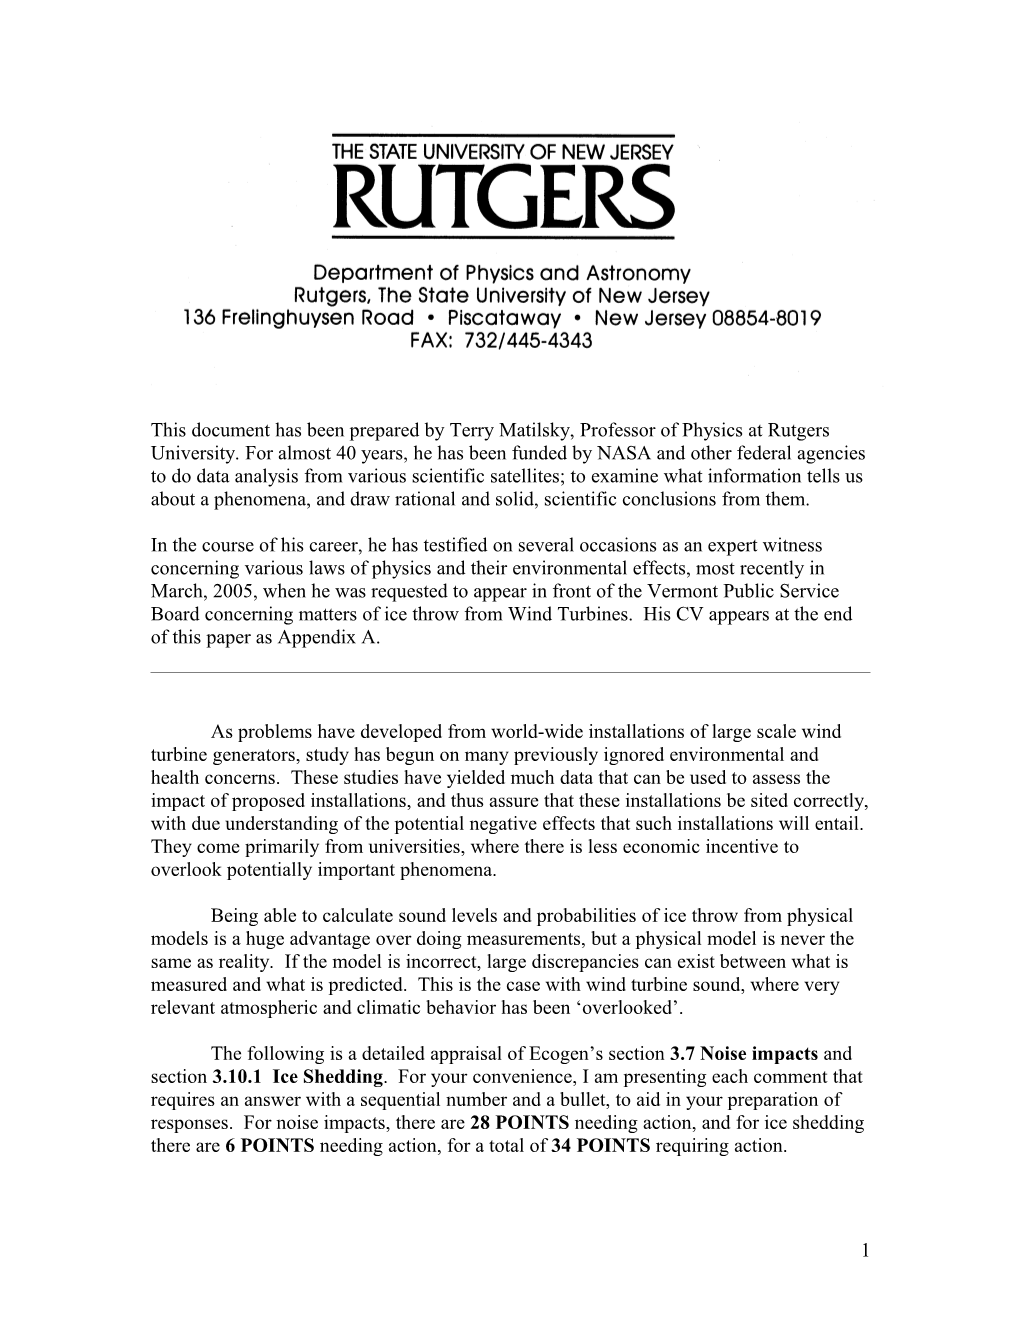 This Document Has Been Prepared by Terry Matilsky, Professor of Physics at Rutgers University